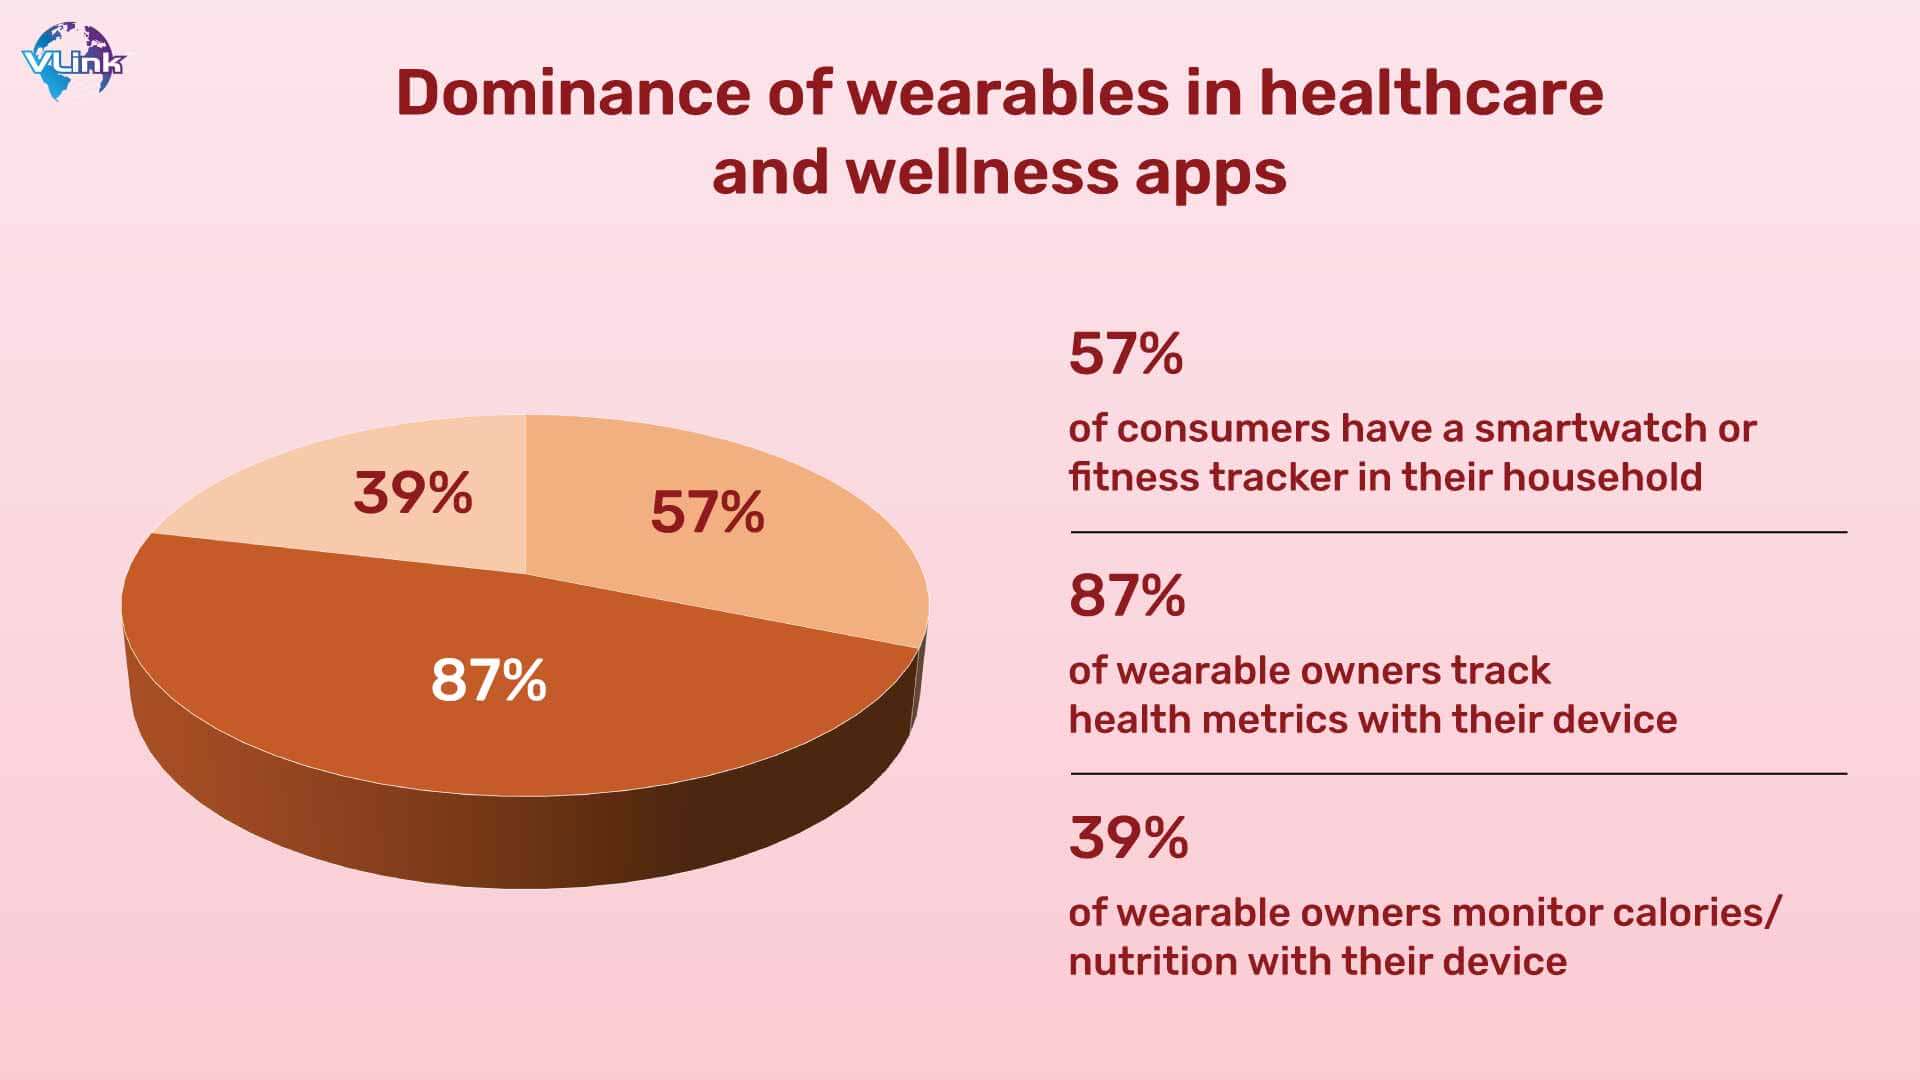 Dominance of wearables in healthcare and wellness apps